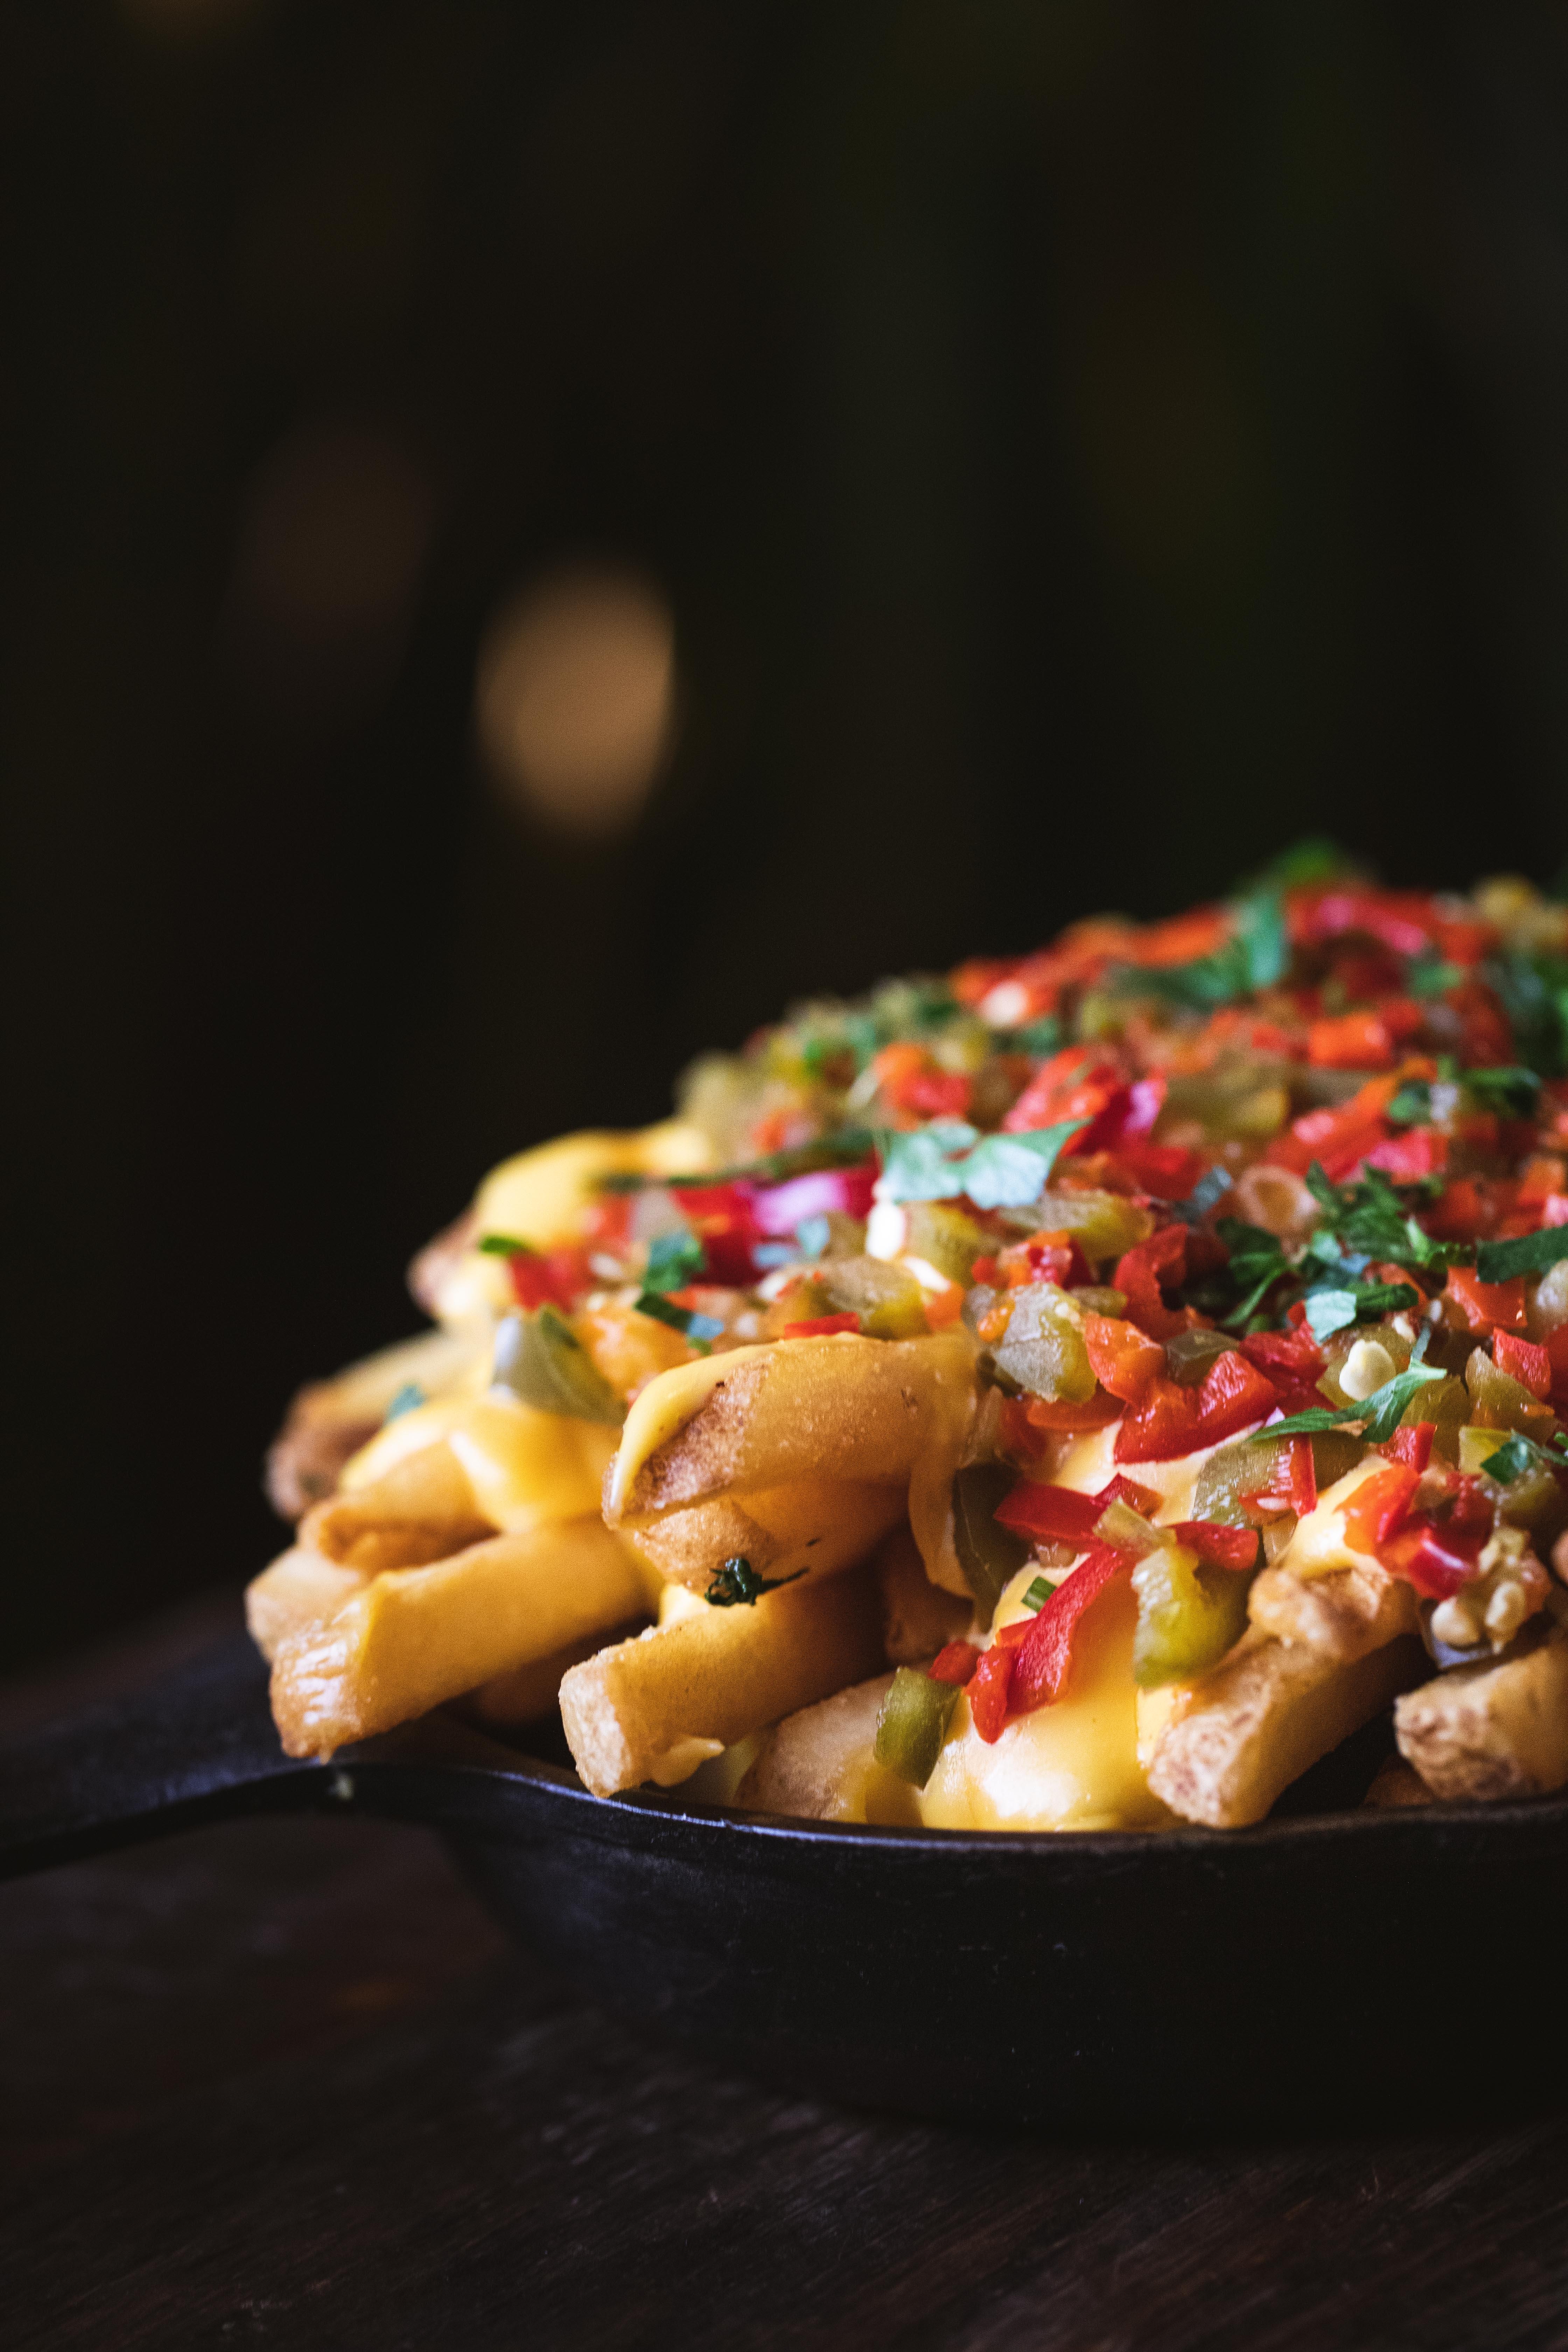 Spicy Cheese Fries